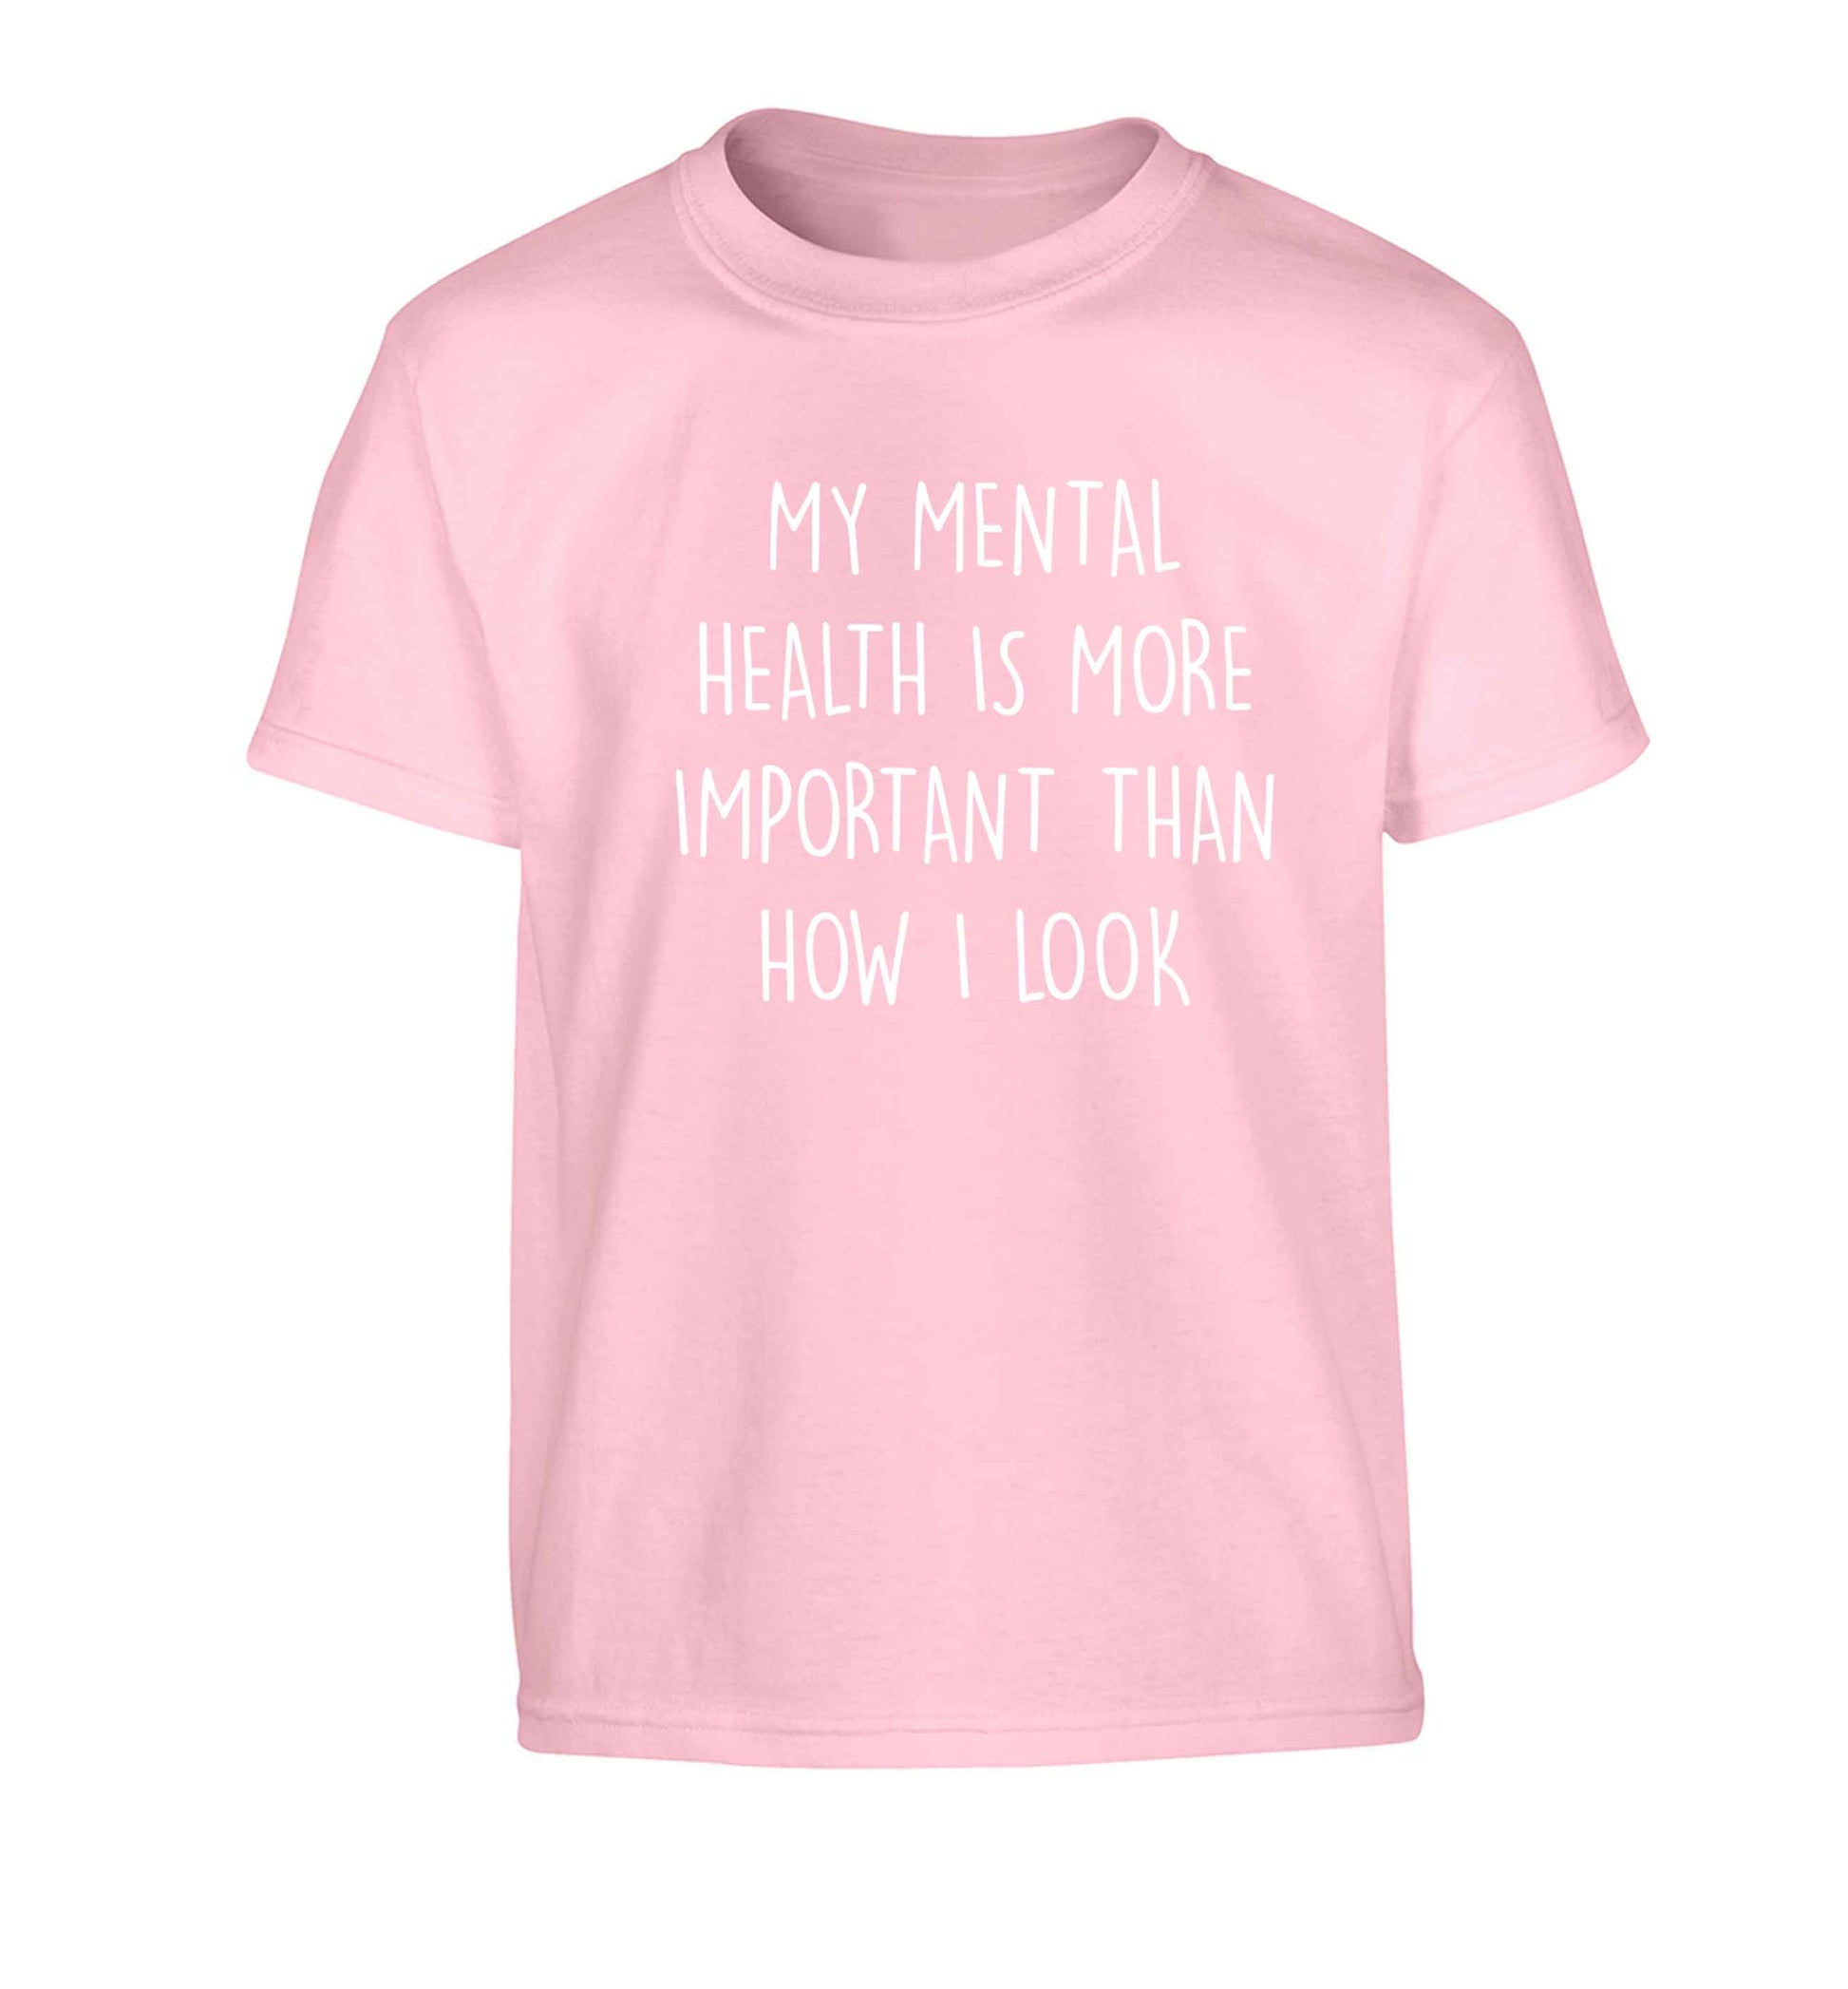 My mental health is more importnat than how I look Children's light pink Tshirt 12-13 Years